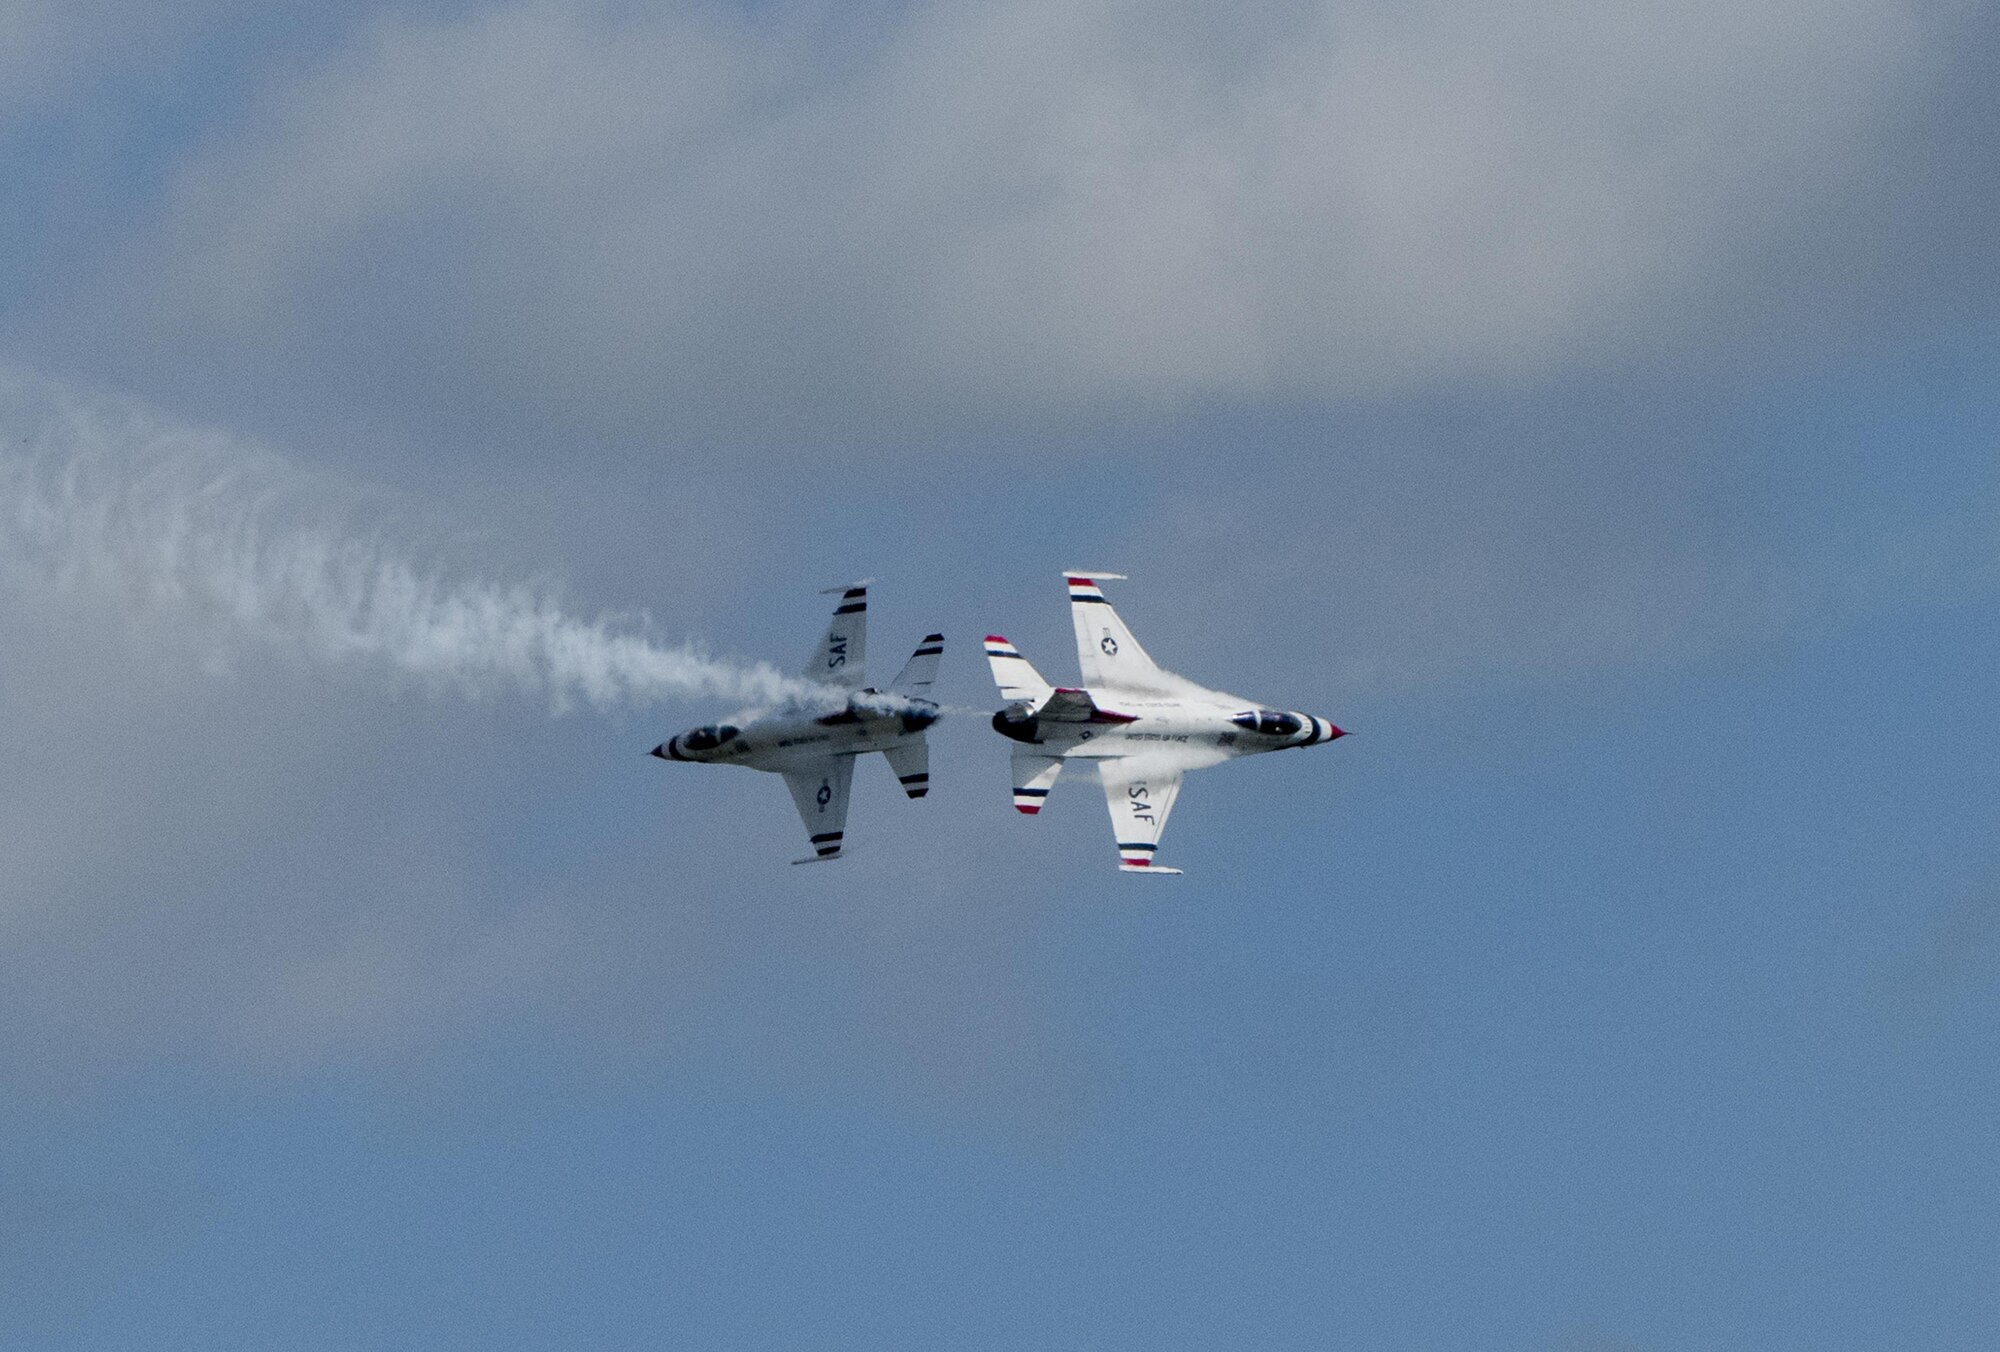 The U.S. Air Force Thunderbirds perform an aerial demonstration during the Wings over Solano Air Show at Travis Air Force Base, Calif., May 6, 2017. The two-day event also featured performances by the U.S. Army Golden Knights parachute team, flyovers and static displays. (U.S. Air Force photo by Heide Couch)